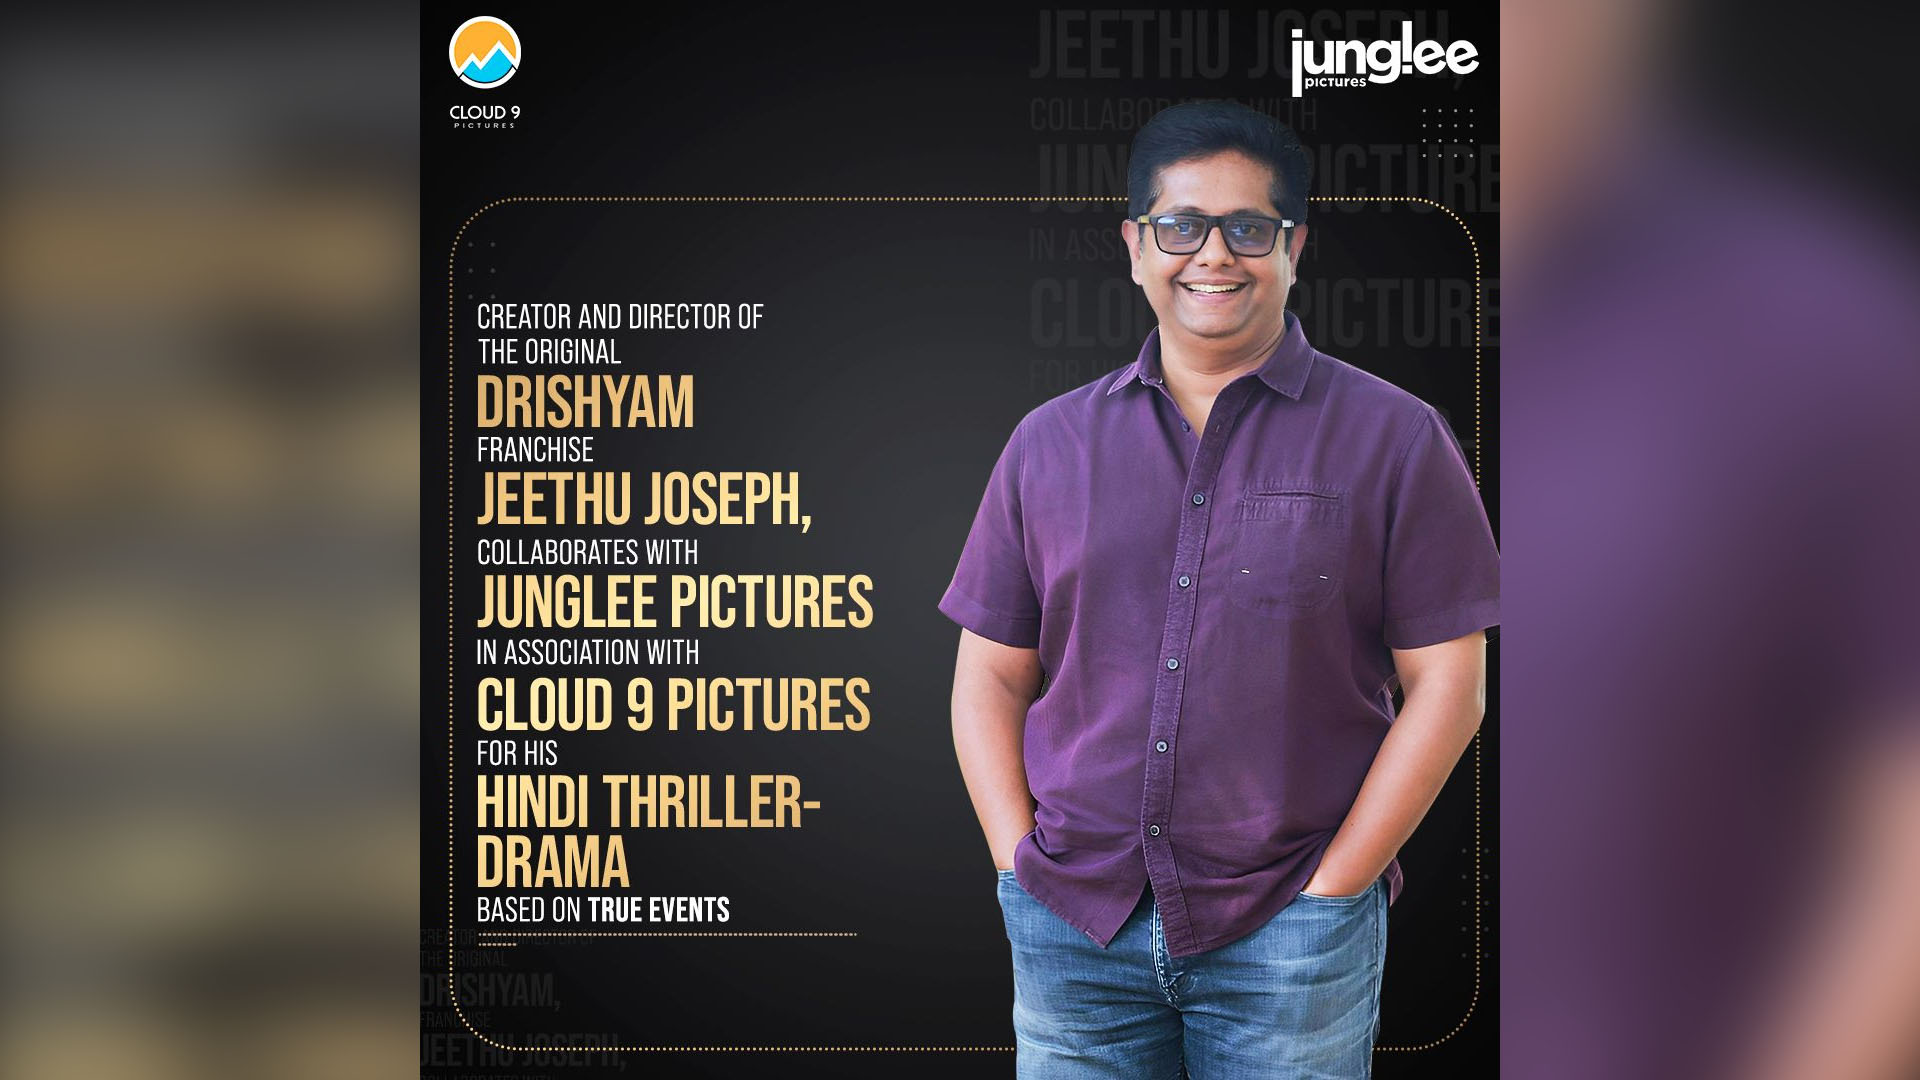 JUNGLEE PICTURES ANNOUNCES ITS NEXT THRILLER-DRAMA WITH DRISHYAM DIRECTOR JEETHU JOSEPH, IN ASSOCIATION WITH CLOUD 9 PICTURES